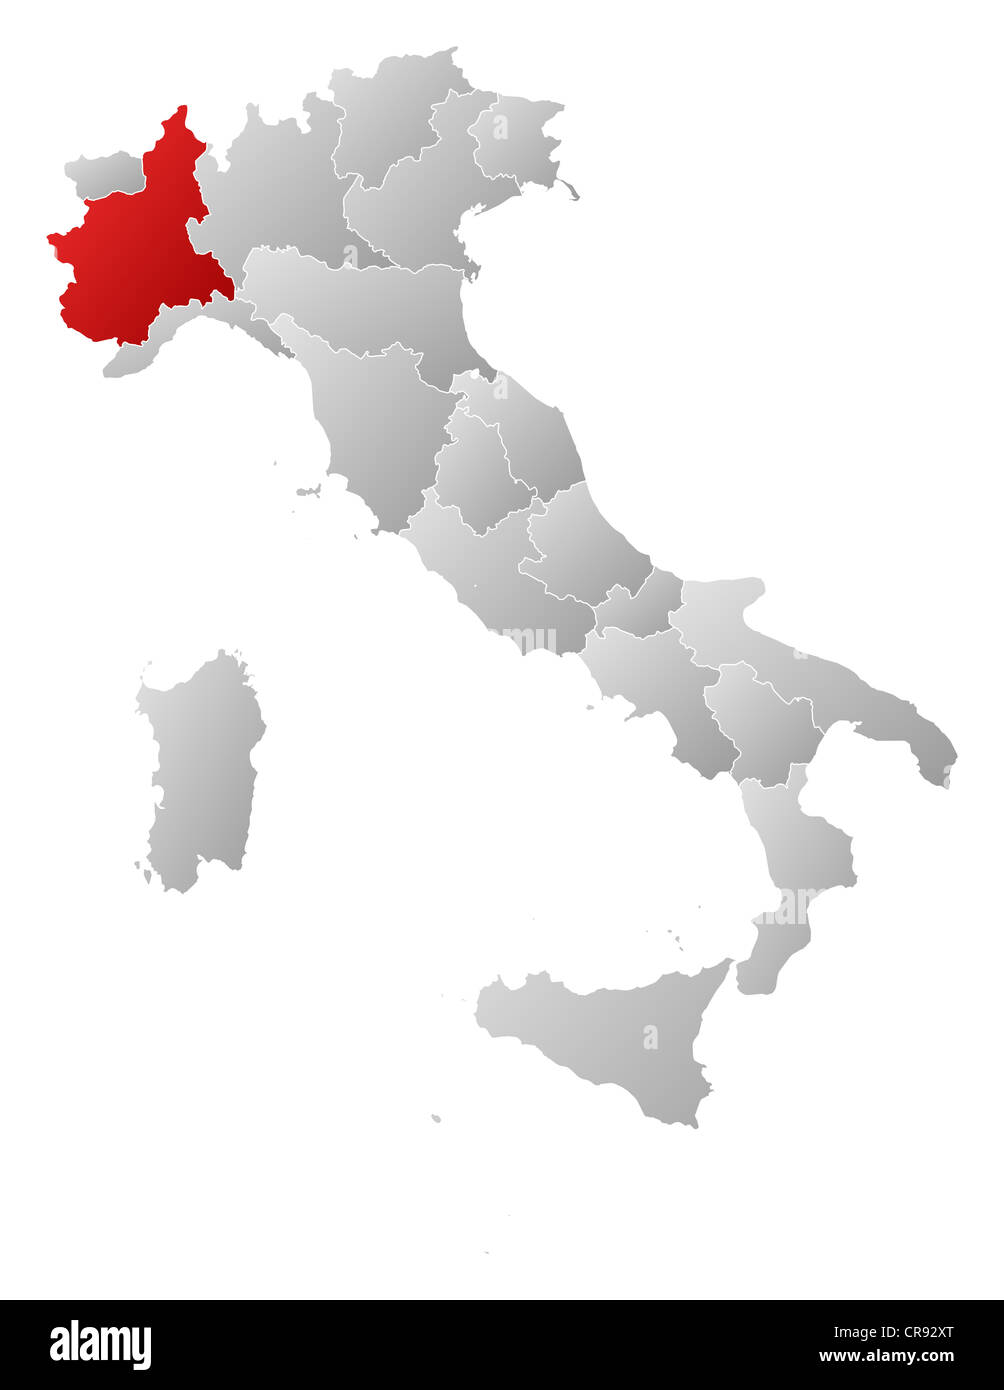 Political map of Italy with the several regions where Piemont is highlighted. Stock Photo